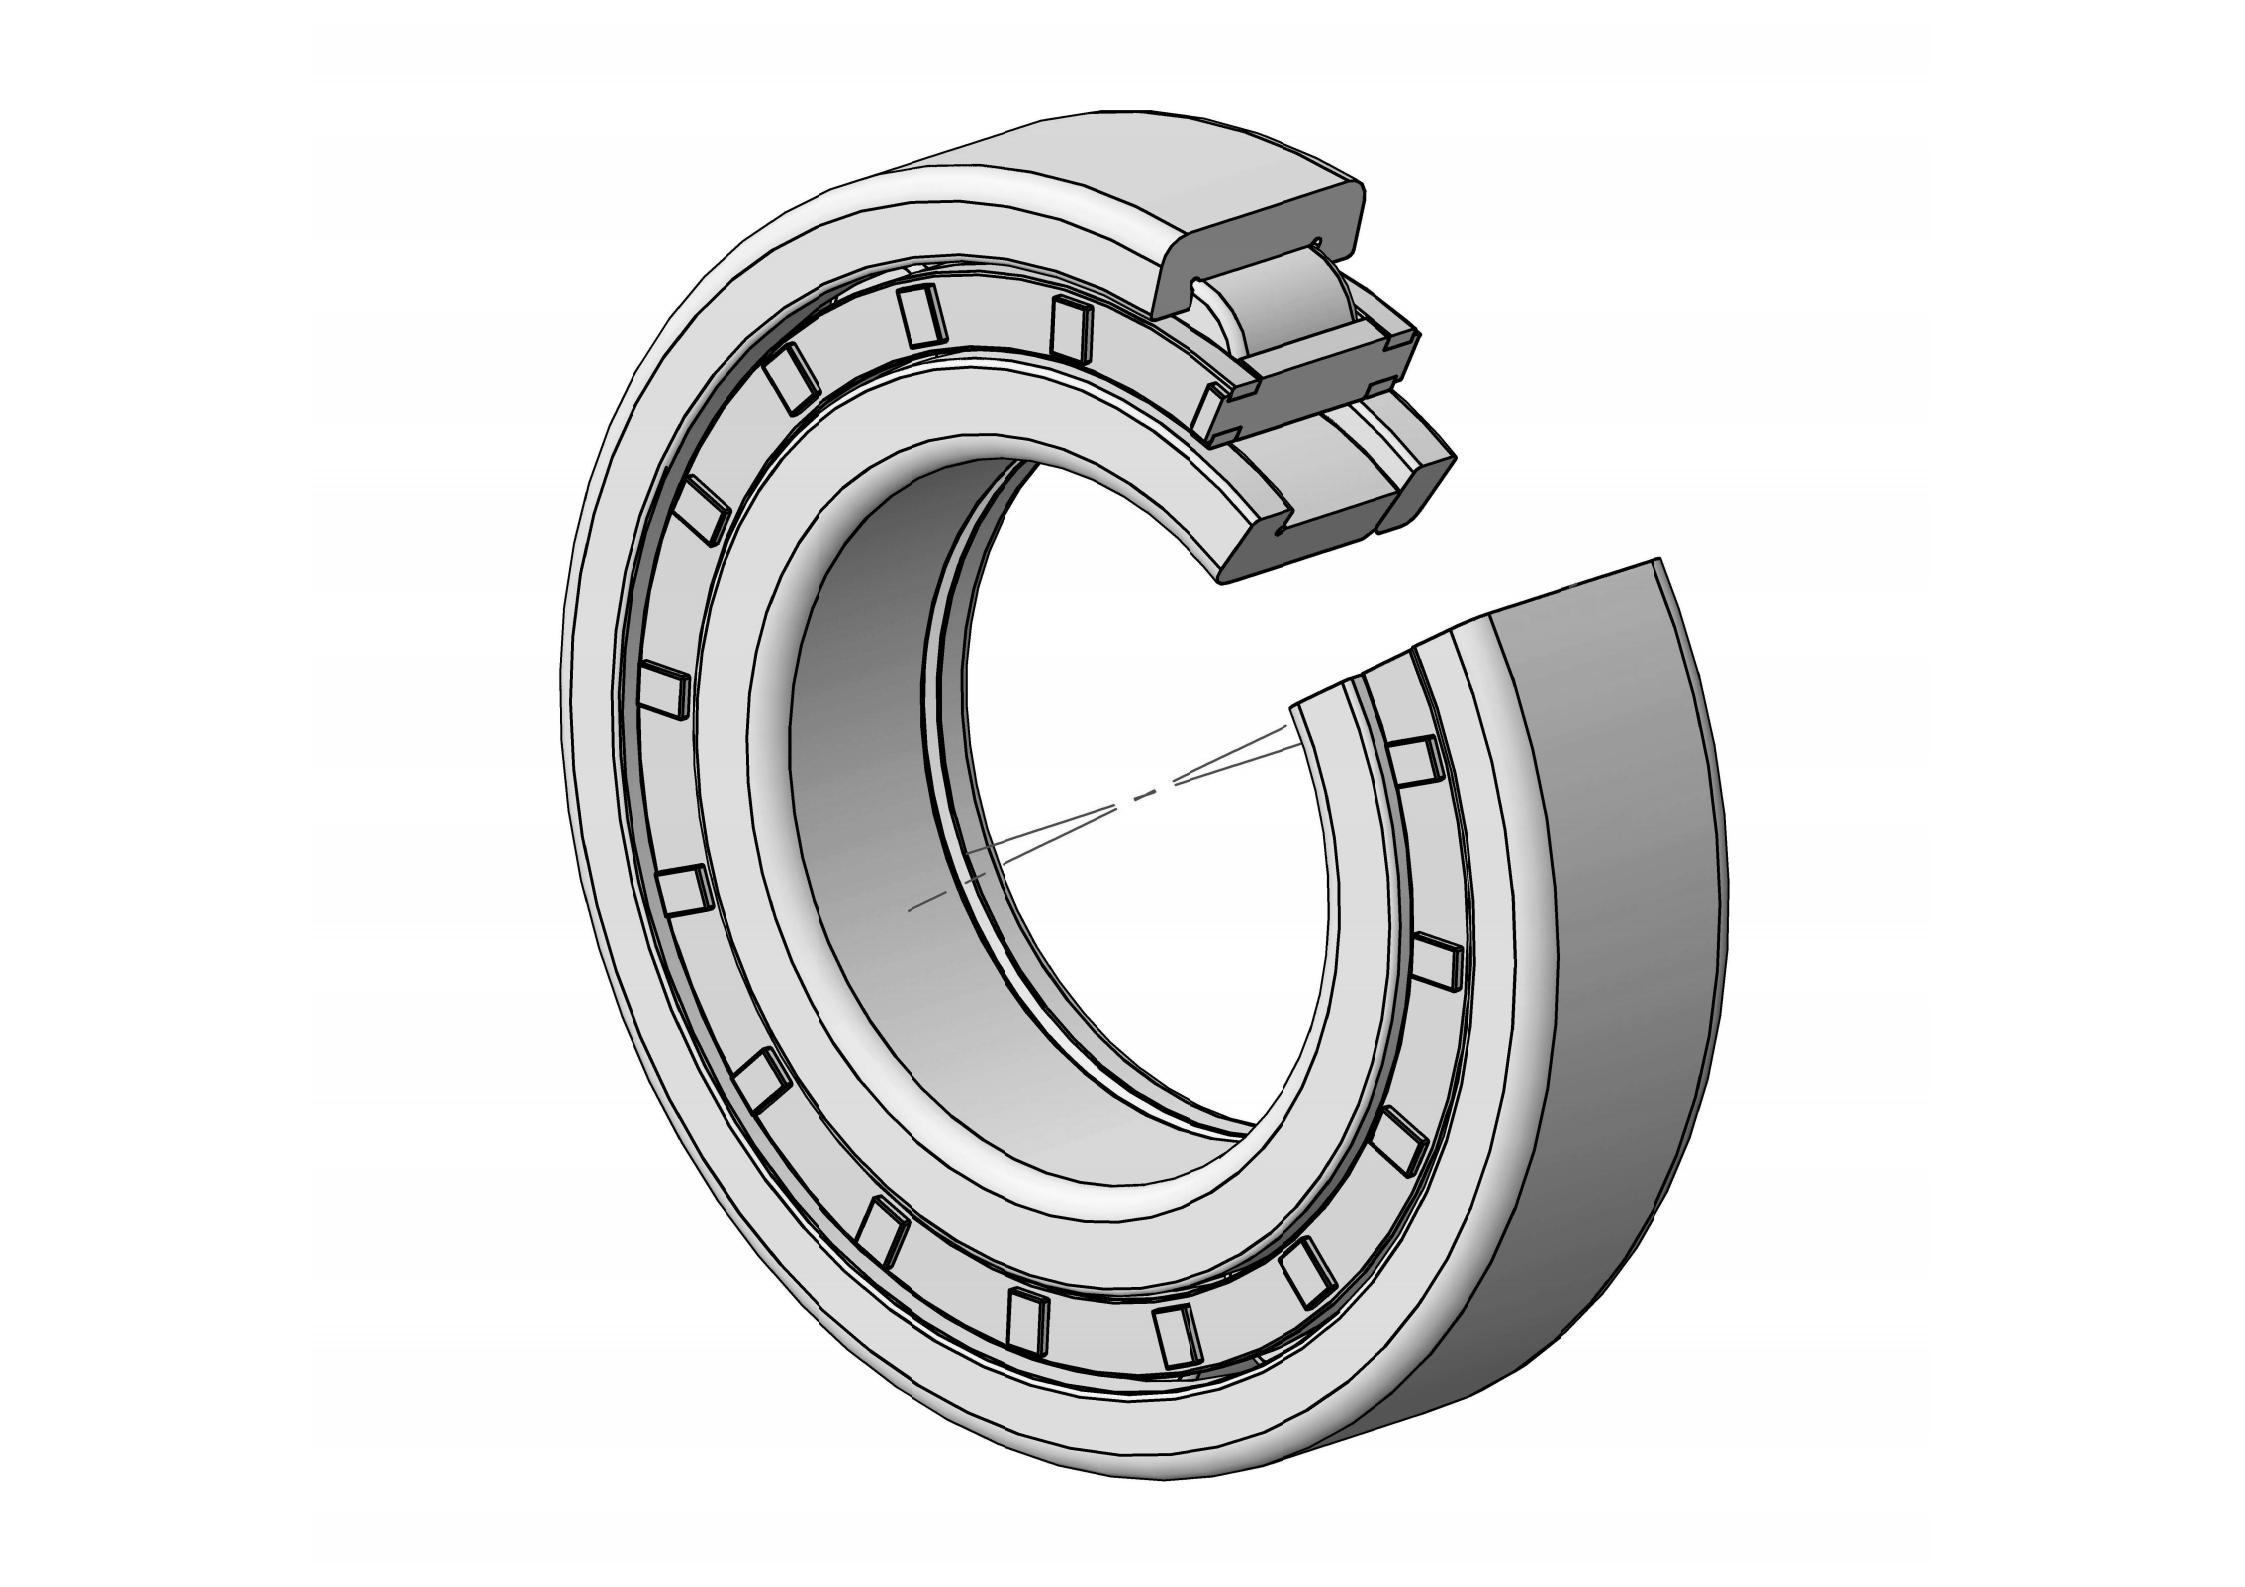 NUP208-E Single Row Cylindrical roller bearing 